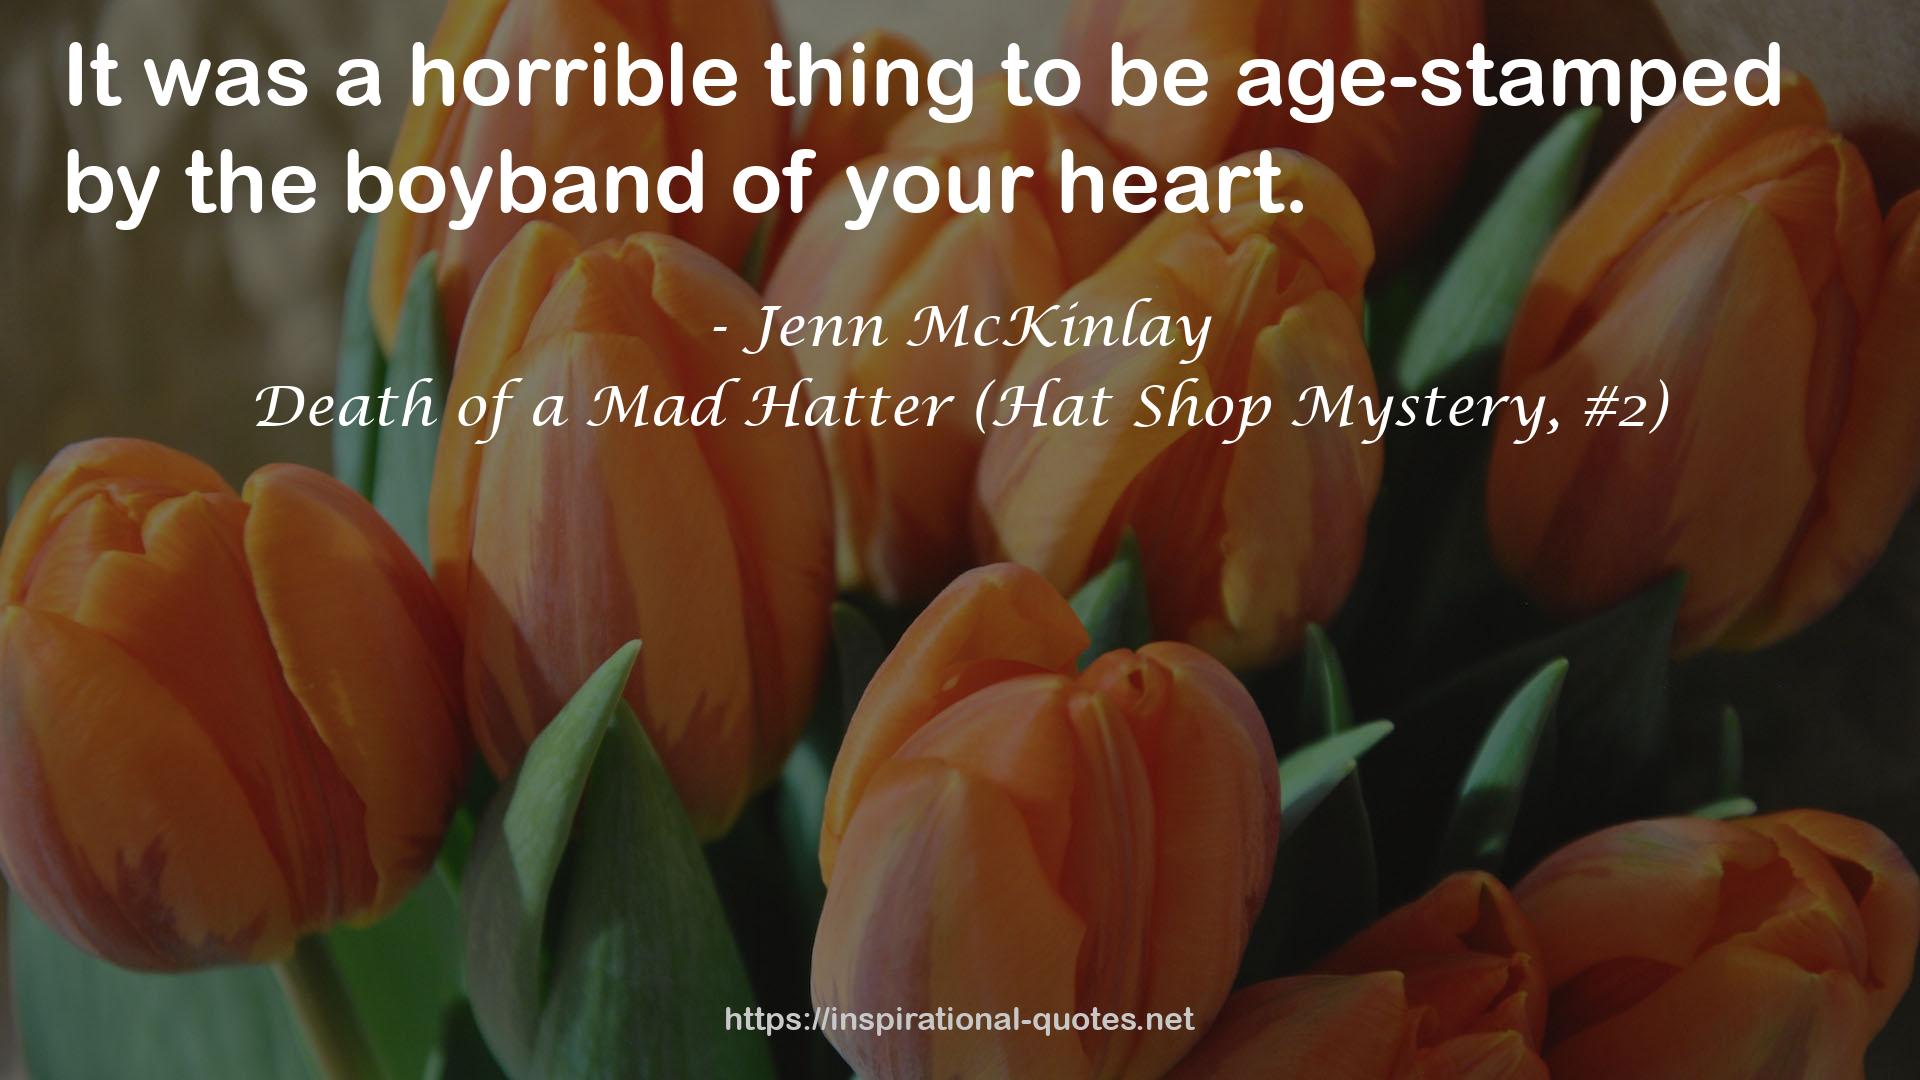 Death of a Mad Hatter (Hat Shop Mystery, #2) QUOTES